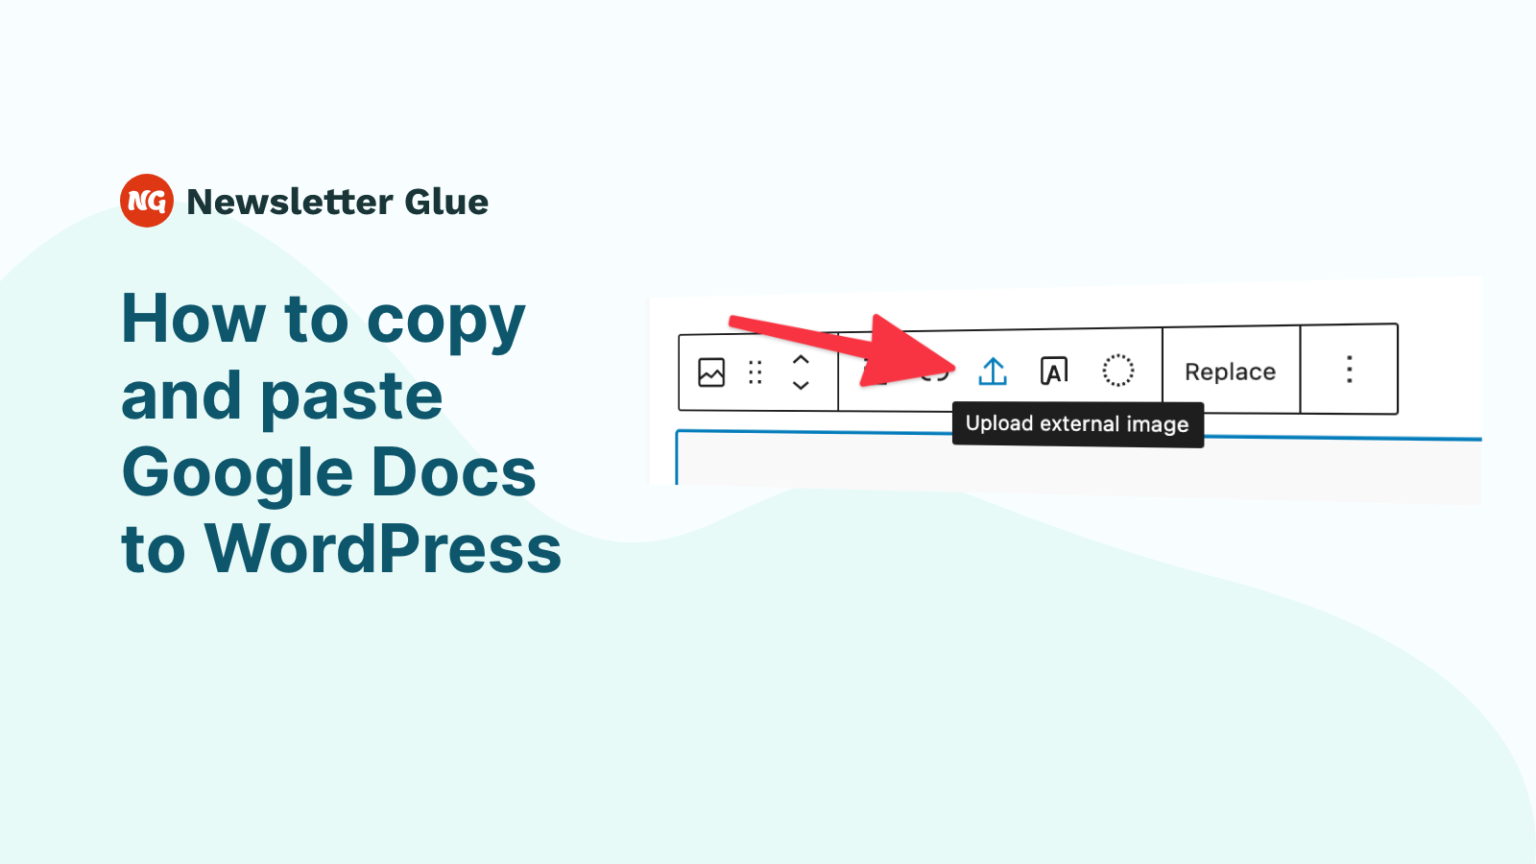 google-docs-to-wordpress-how-to-copy-and-paste-the-entire-post